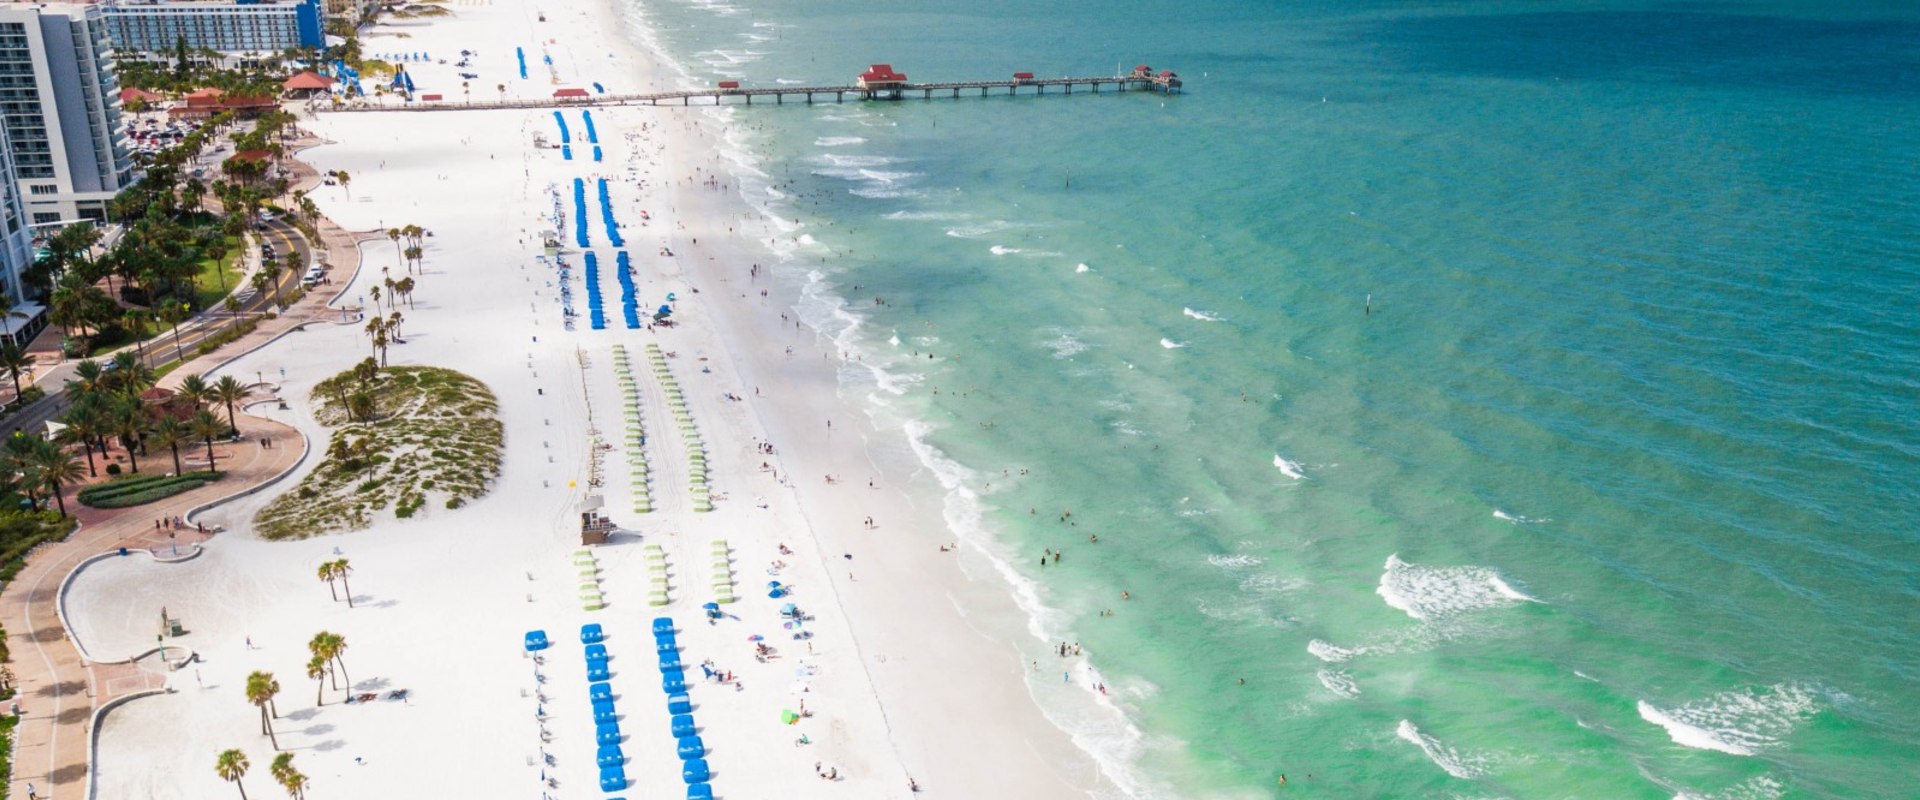 Tampa: The Perfect Spot for a Beach Vacation Getaway